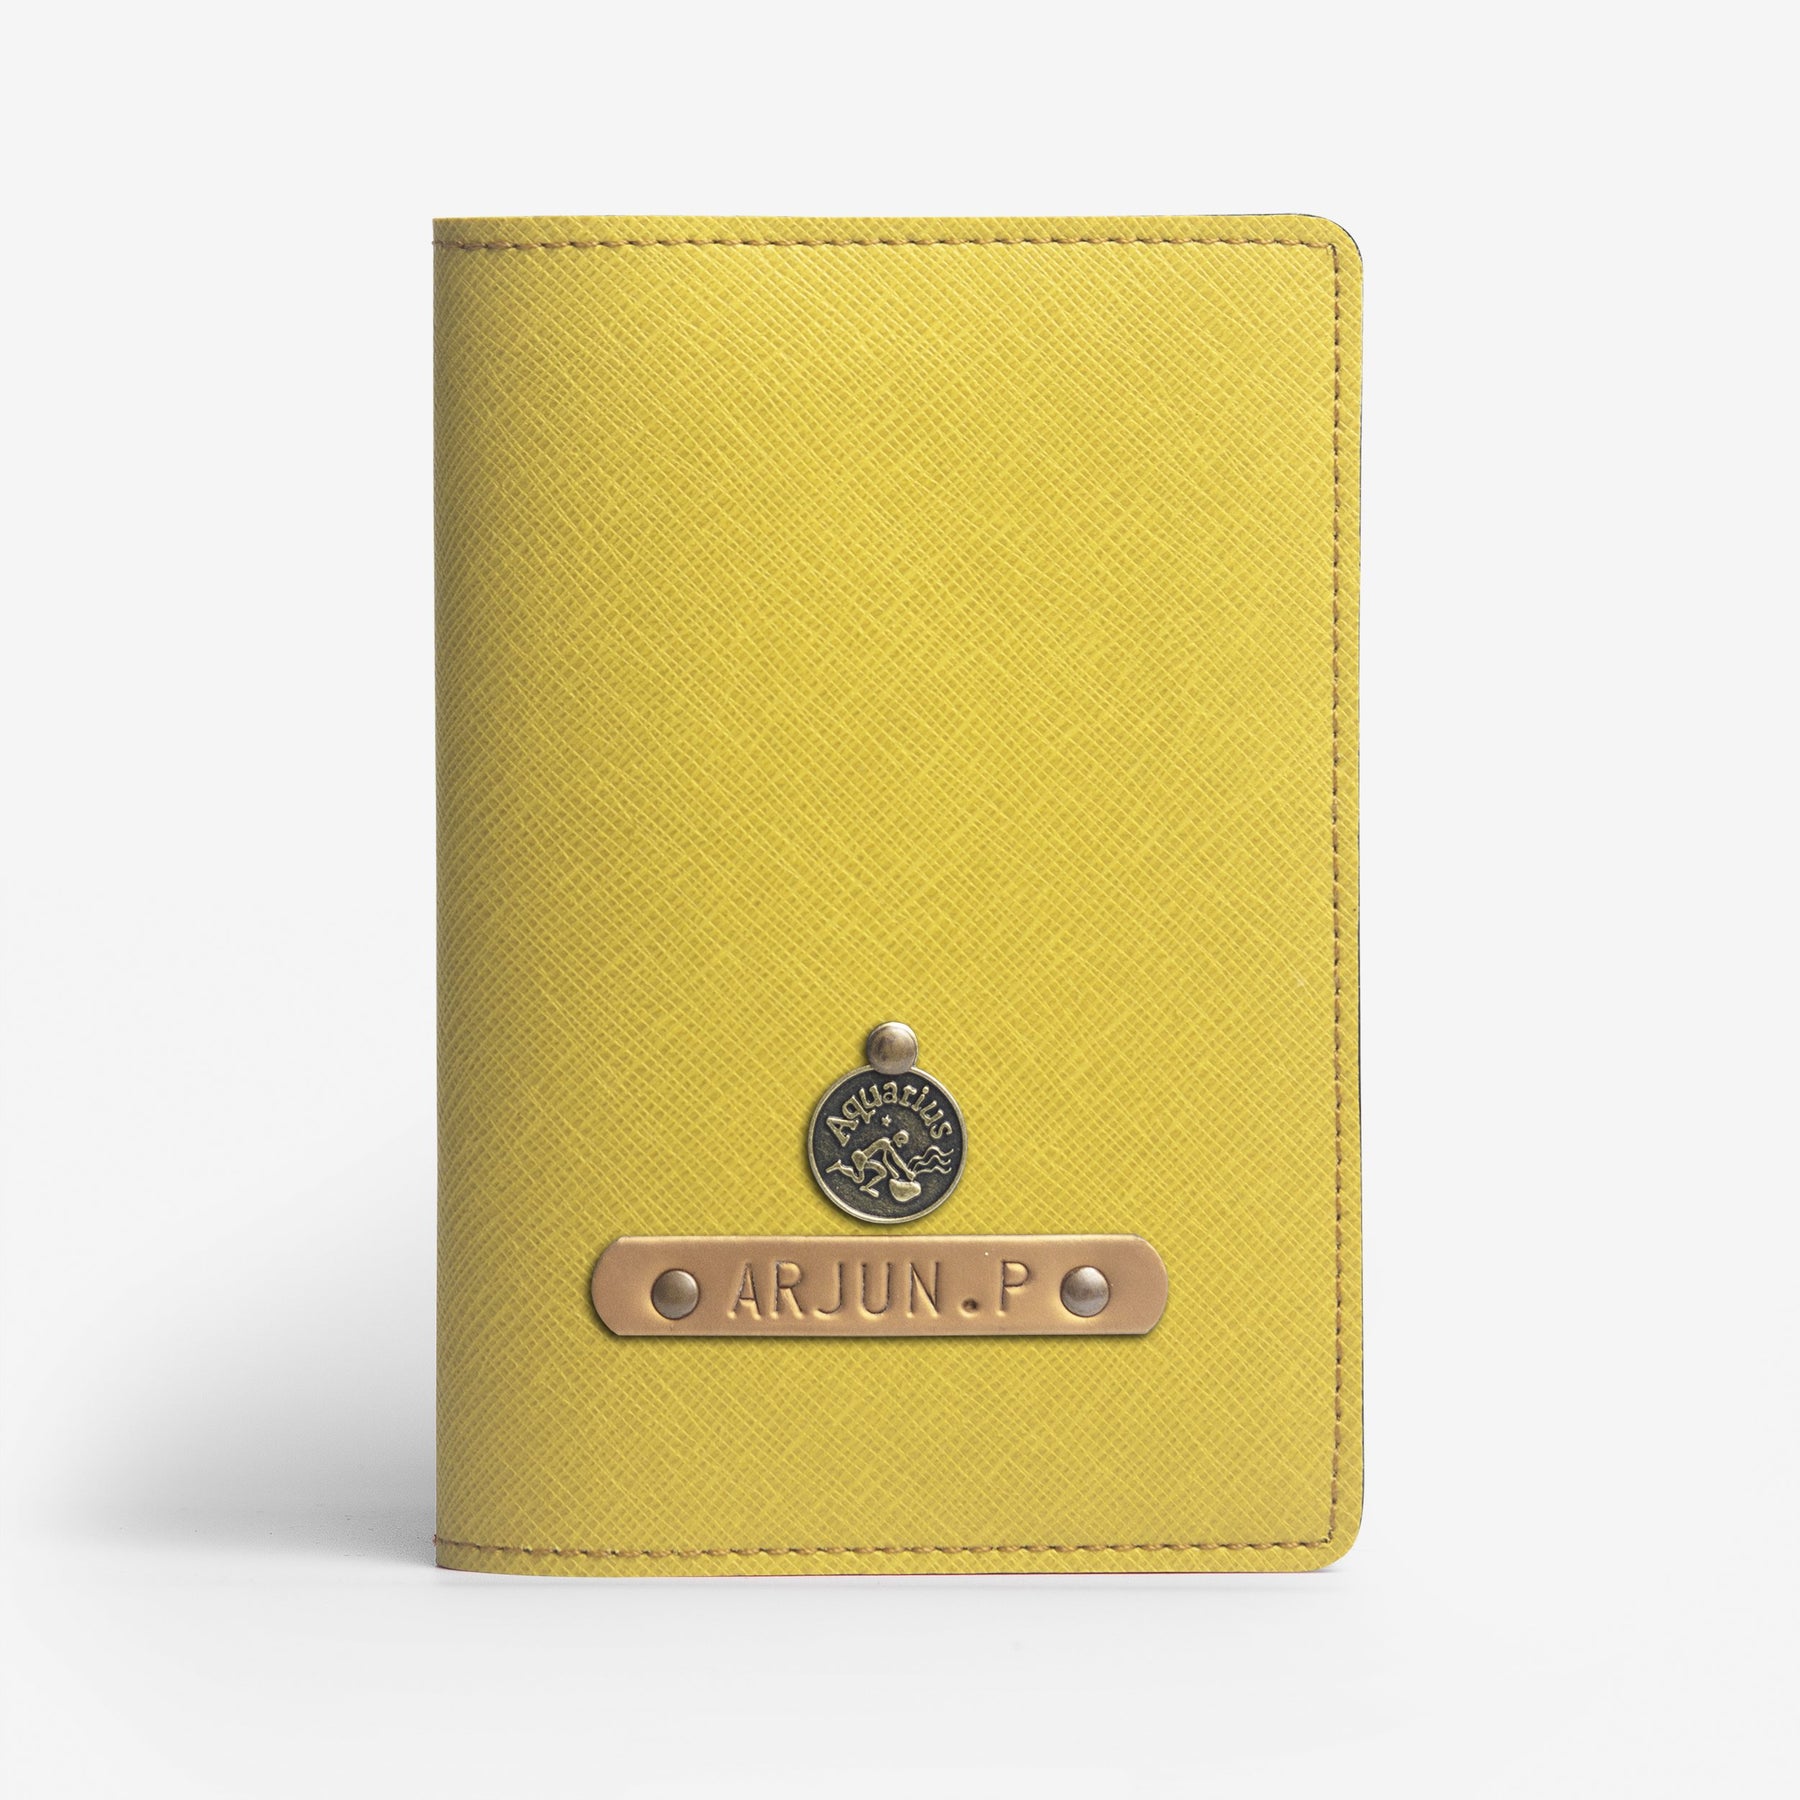 Personalized Passport Cover - Chrome Yellow